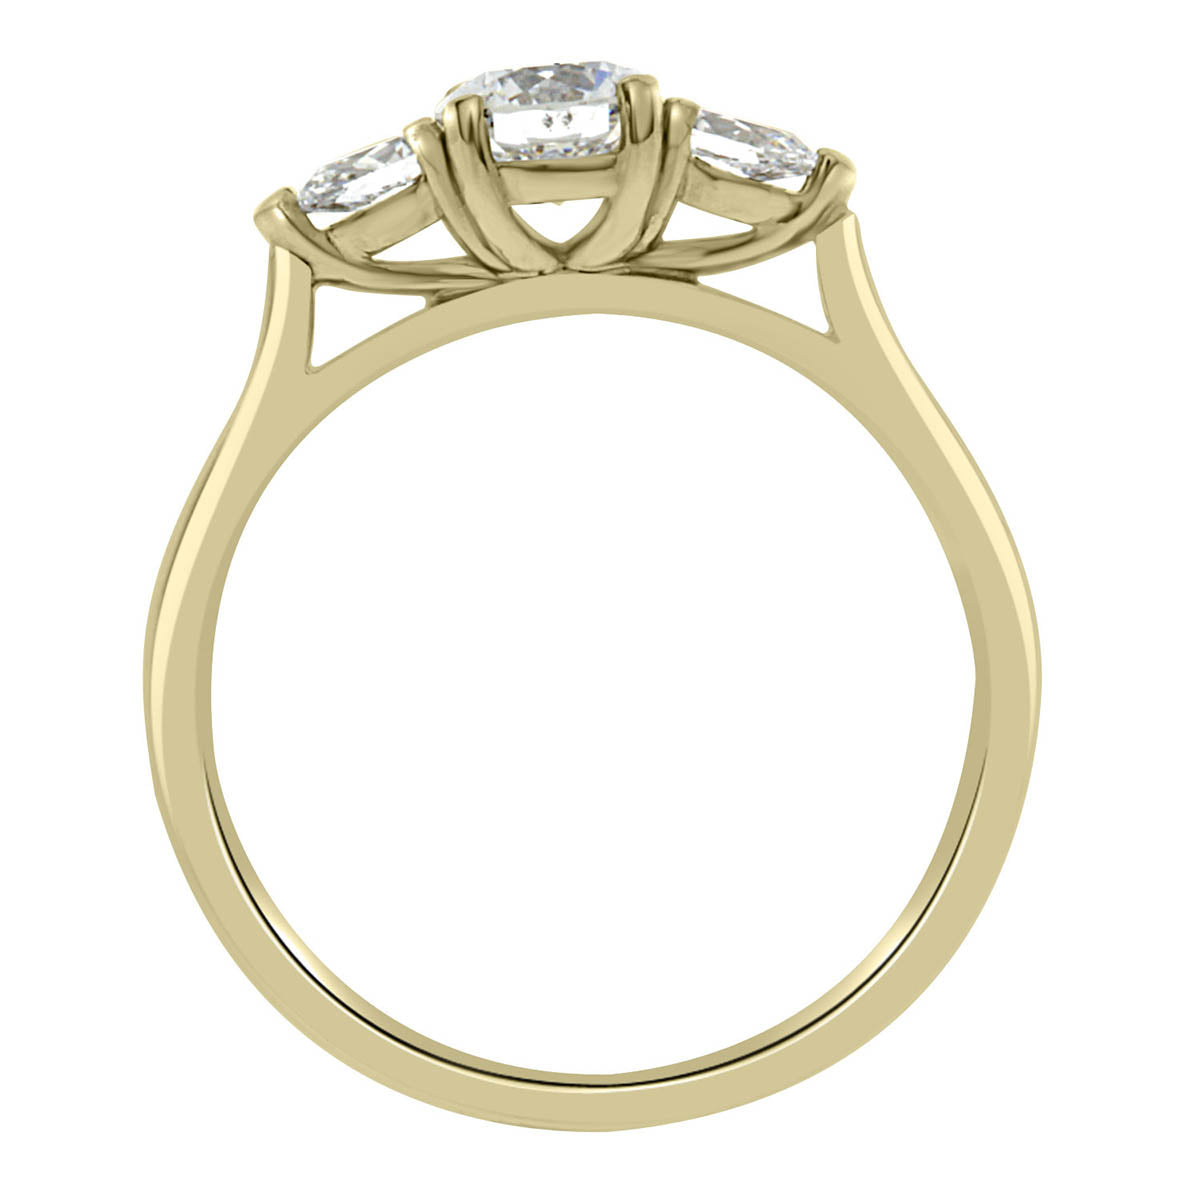 Round and Pear Diamond Ring in yellow gold standing vertical